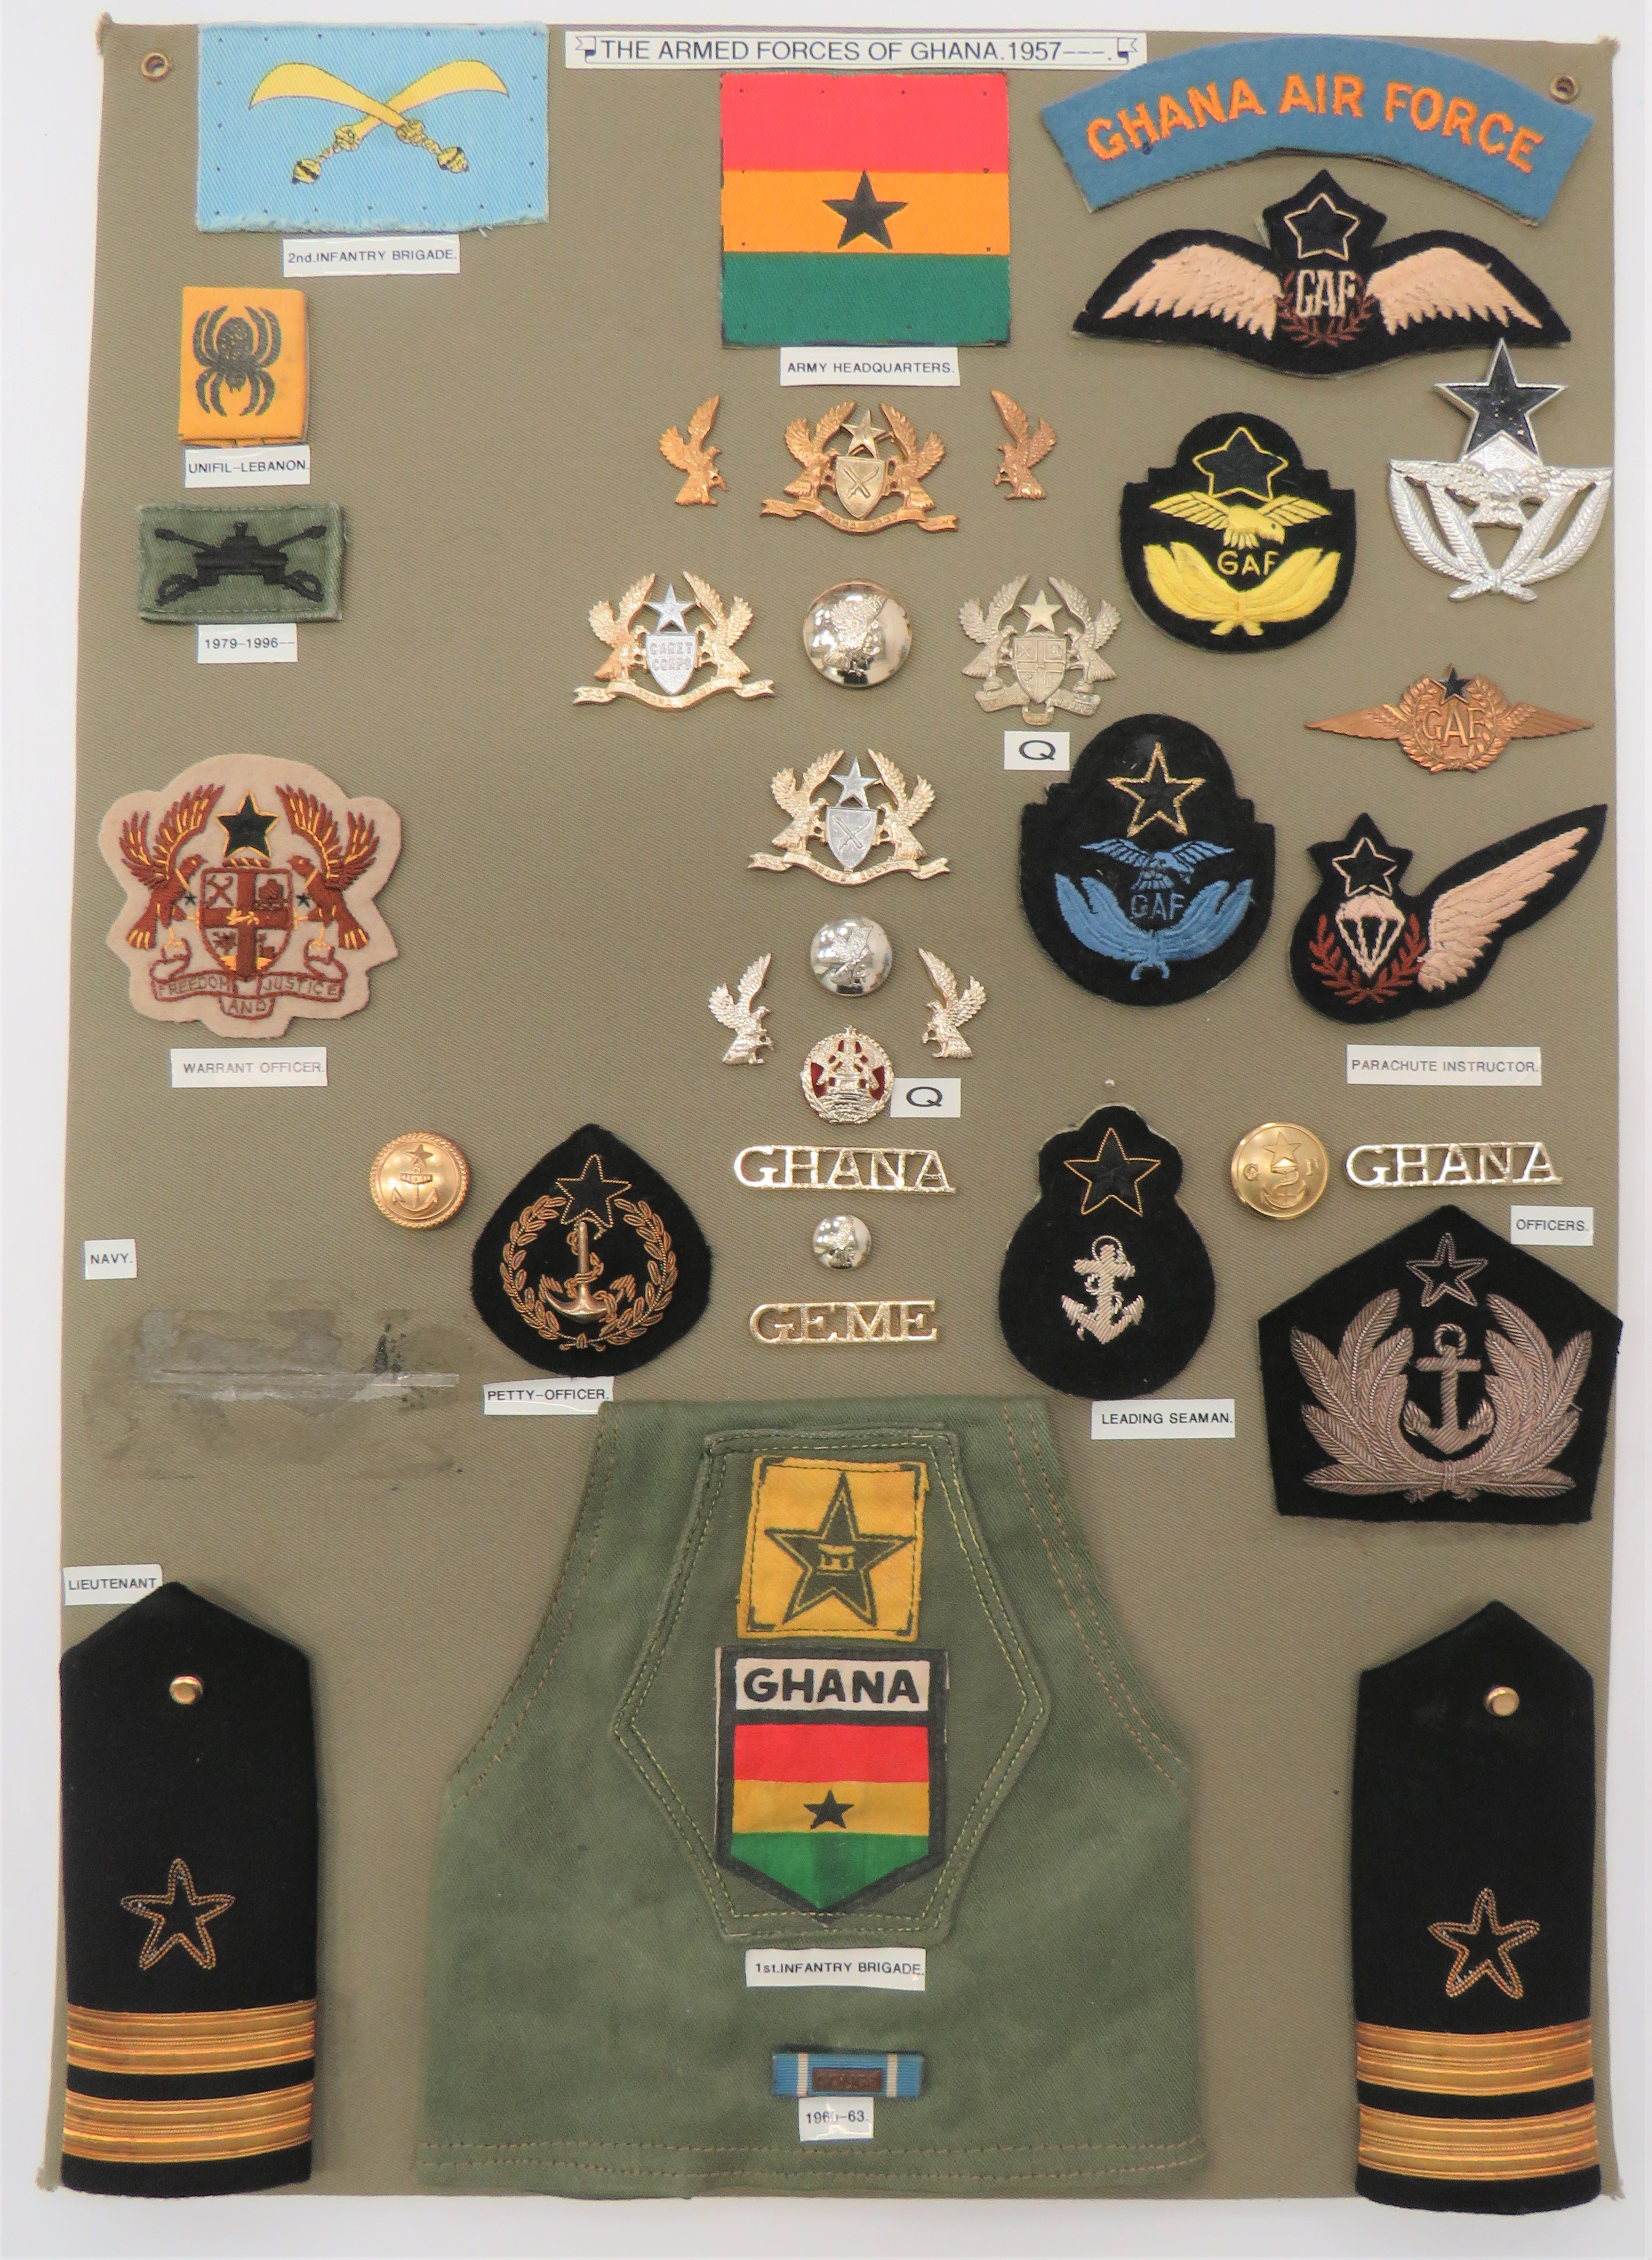 30x Items Of Insignia For Ghana Post 1957 Armed Forces  display board with good tabulated display of